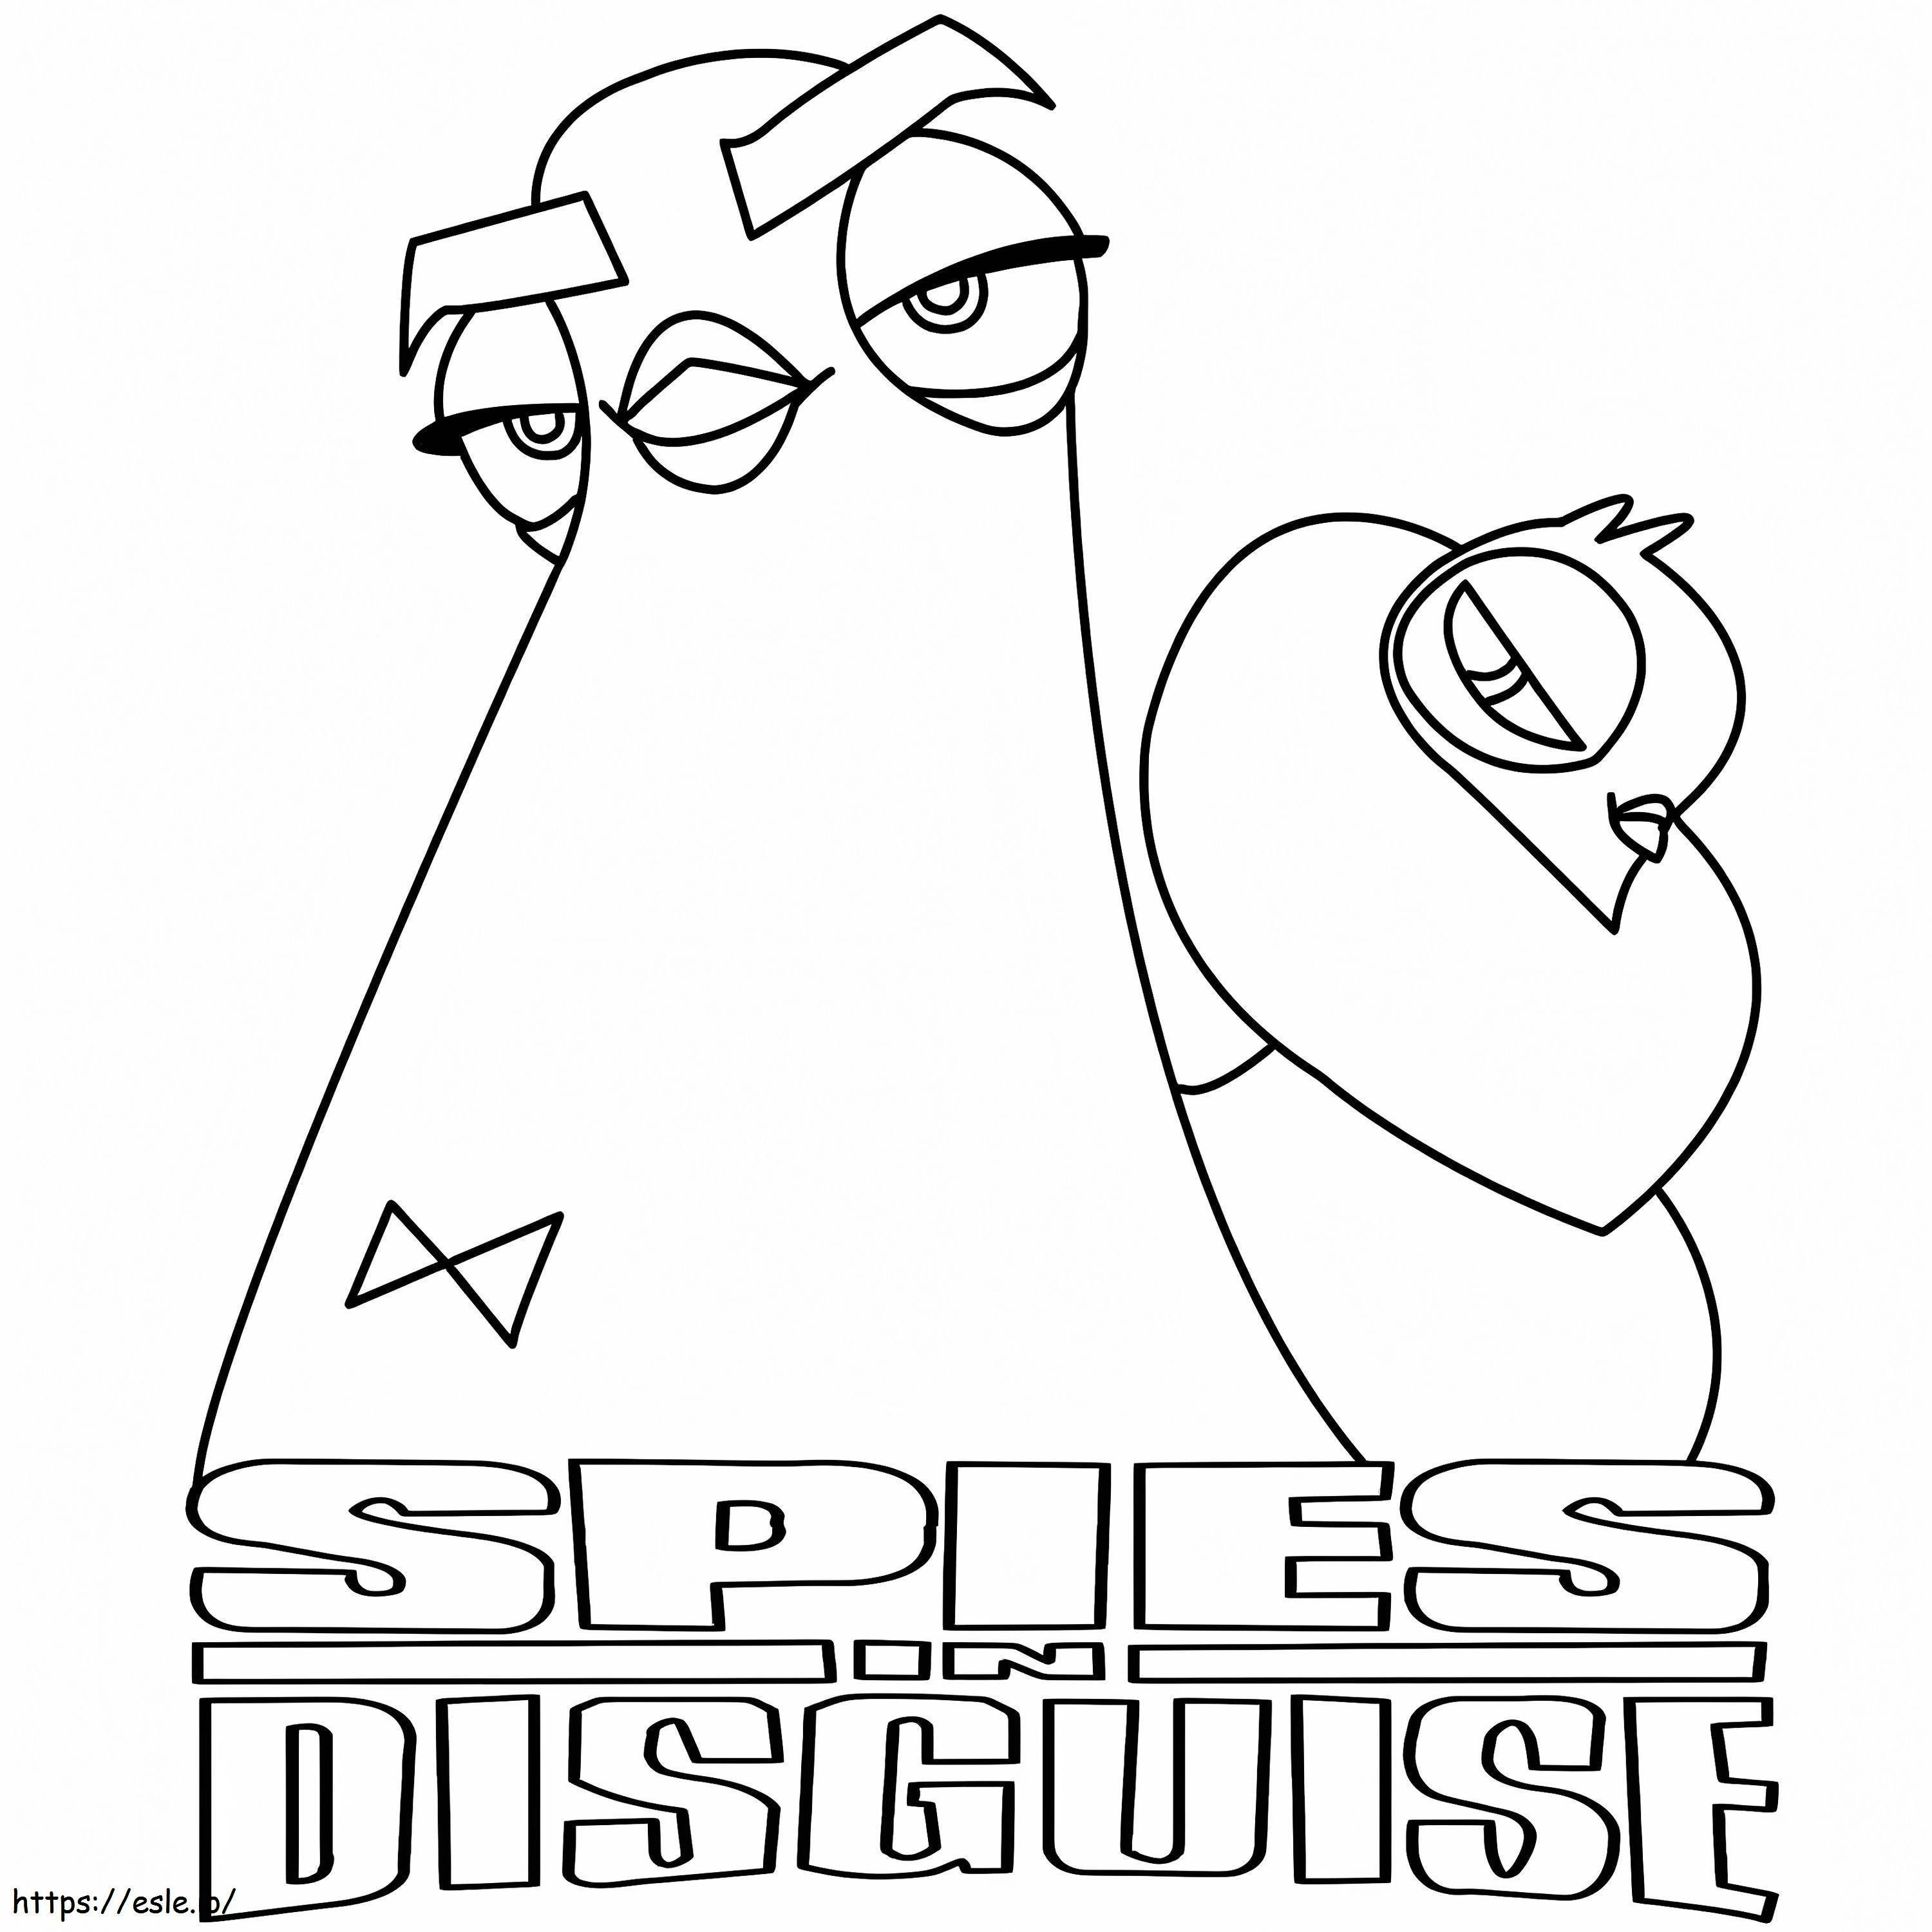 Pigeon Lance Sterling Spies In Disguise coloring page